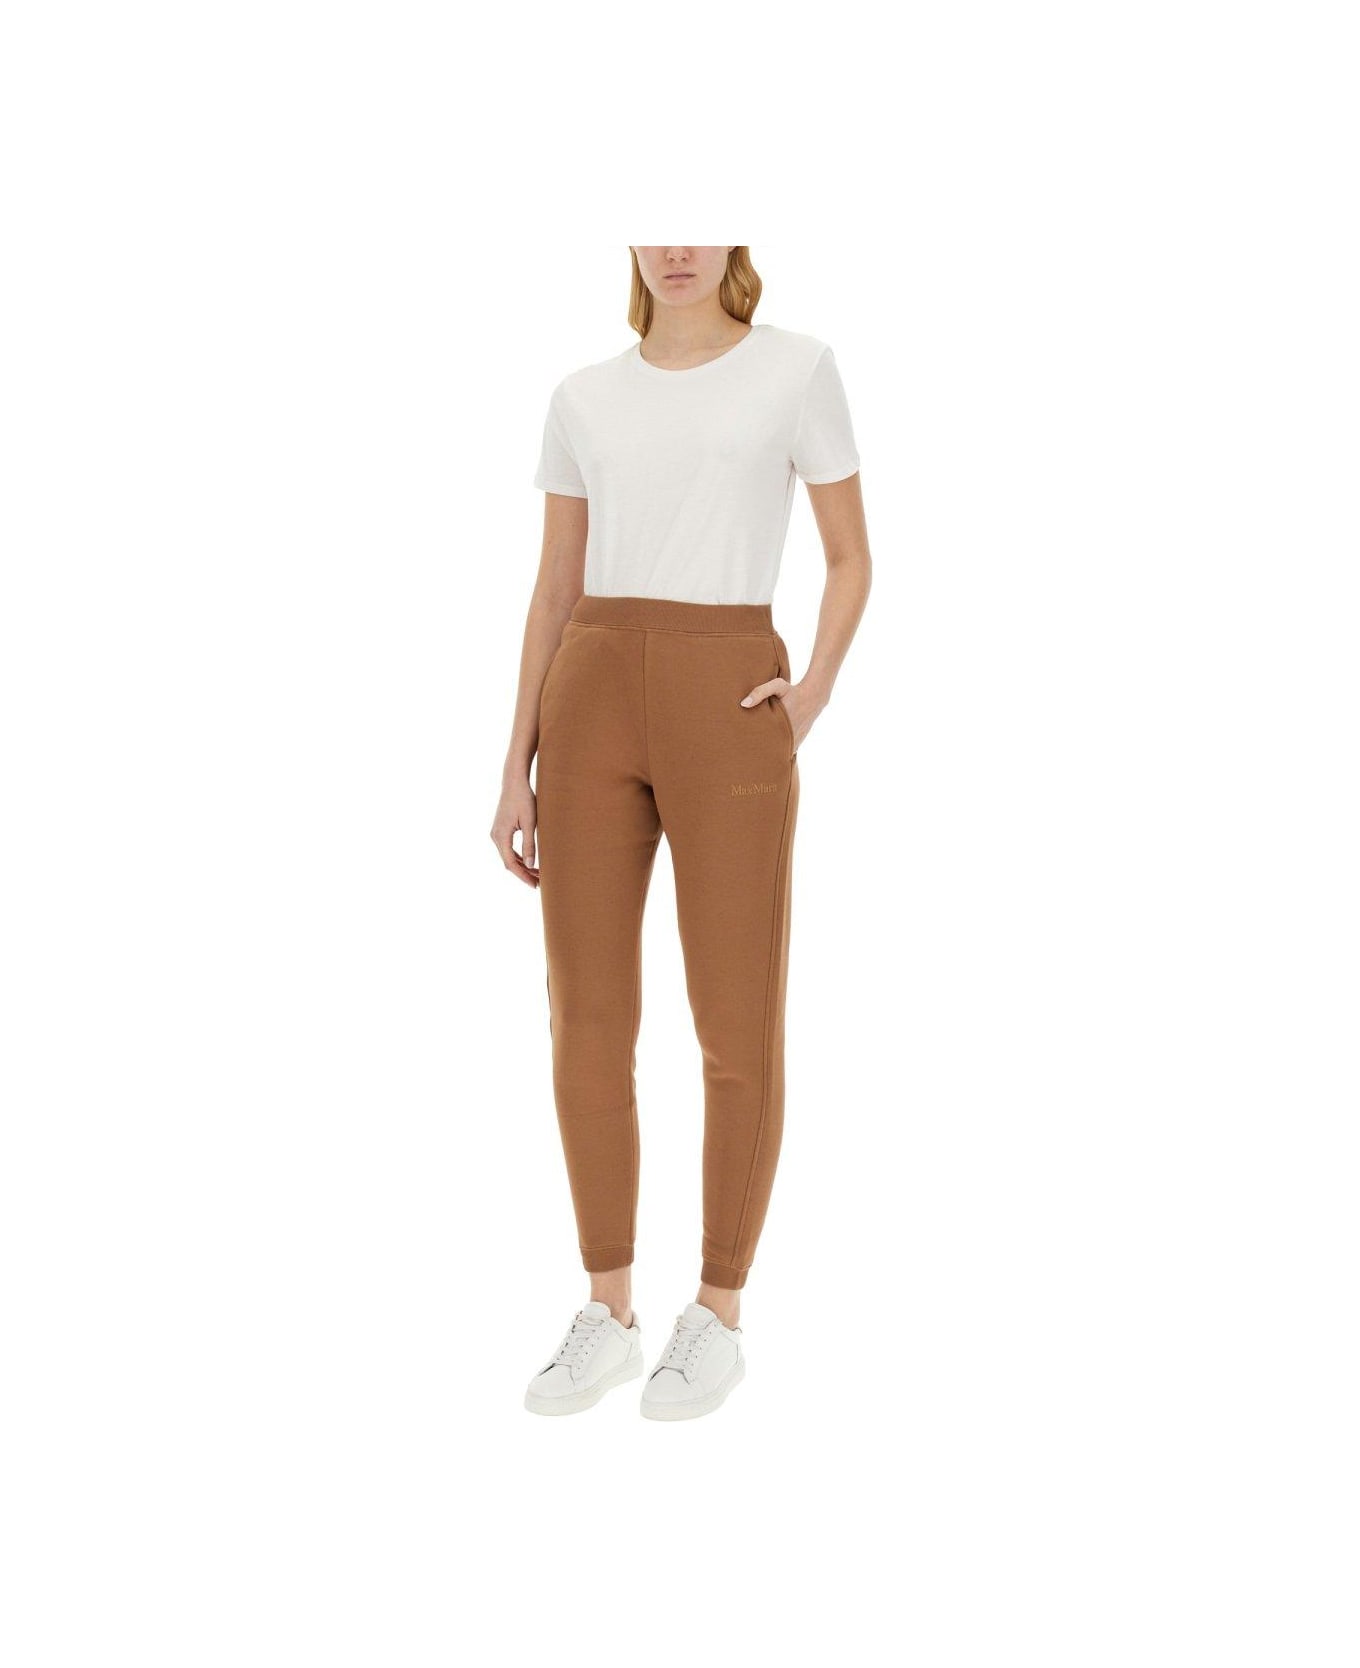 'S Max Mara Logo Embroidered Jogging Trousers - CAMEL